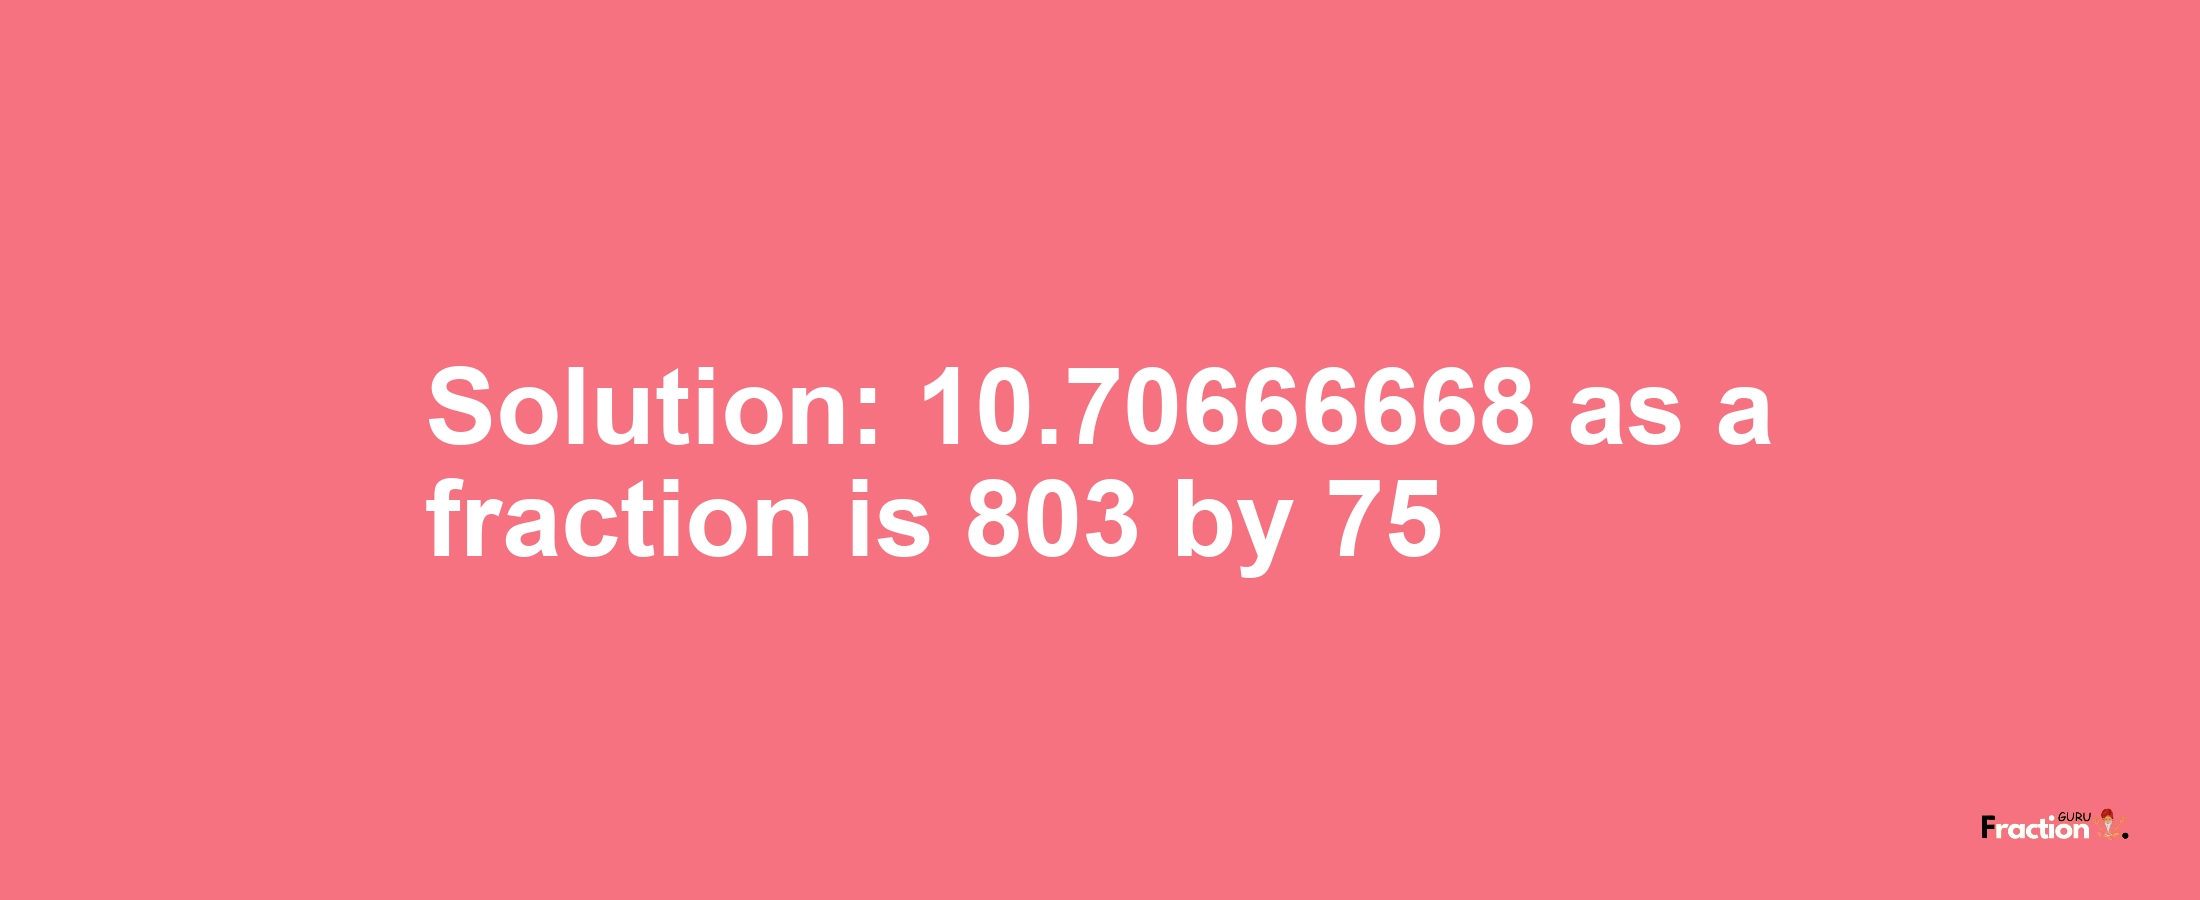 Solution:10.70666668 as a fraction is 803/75